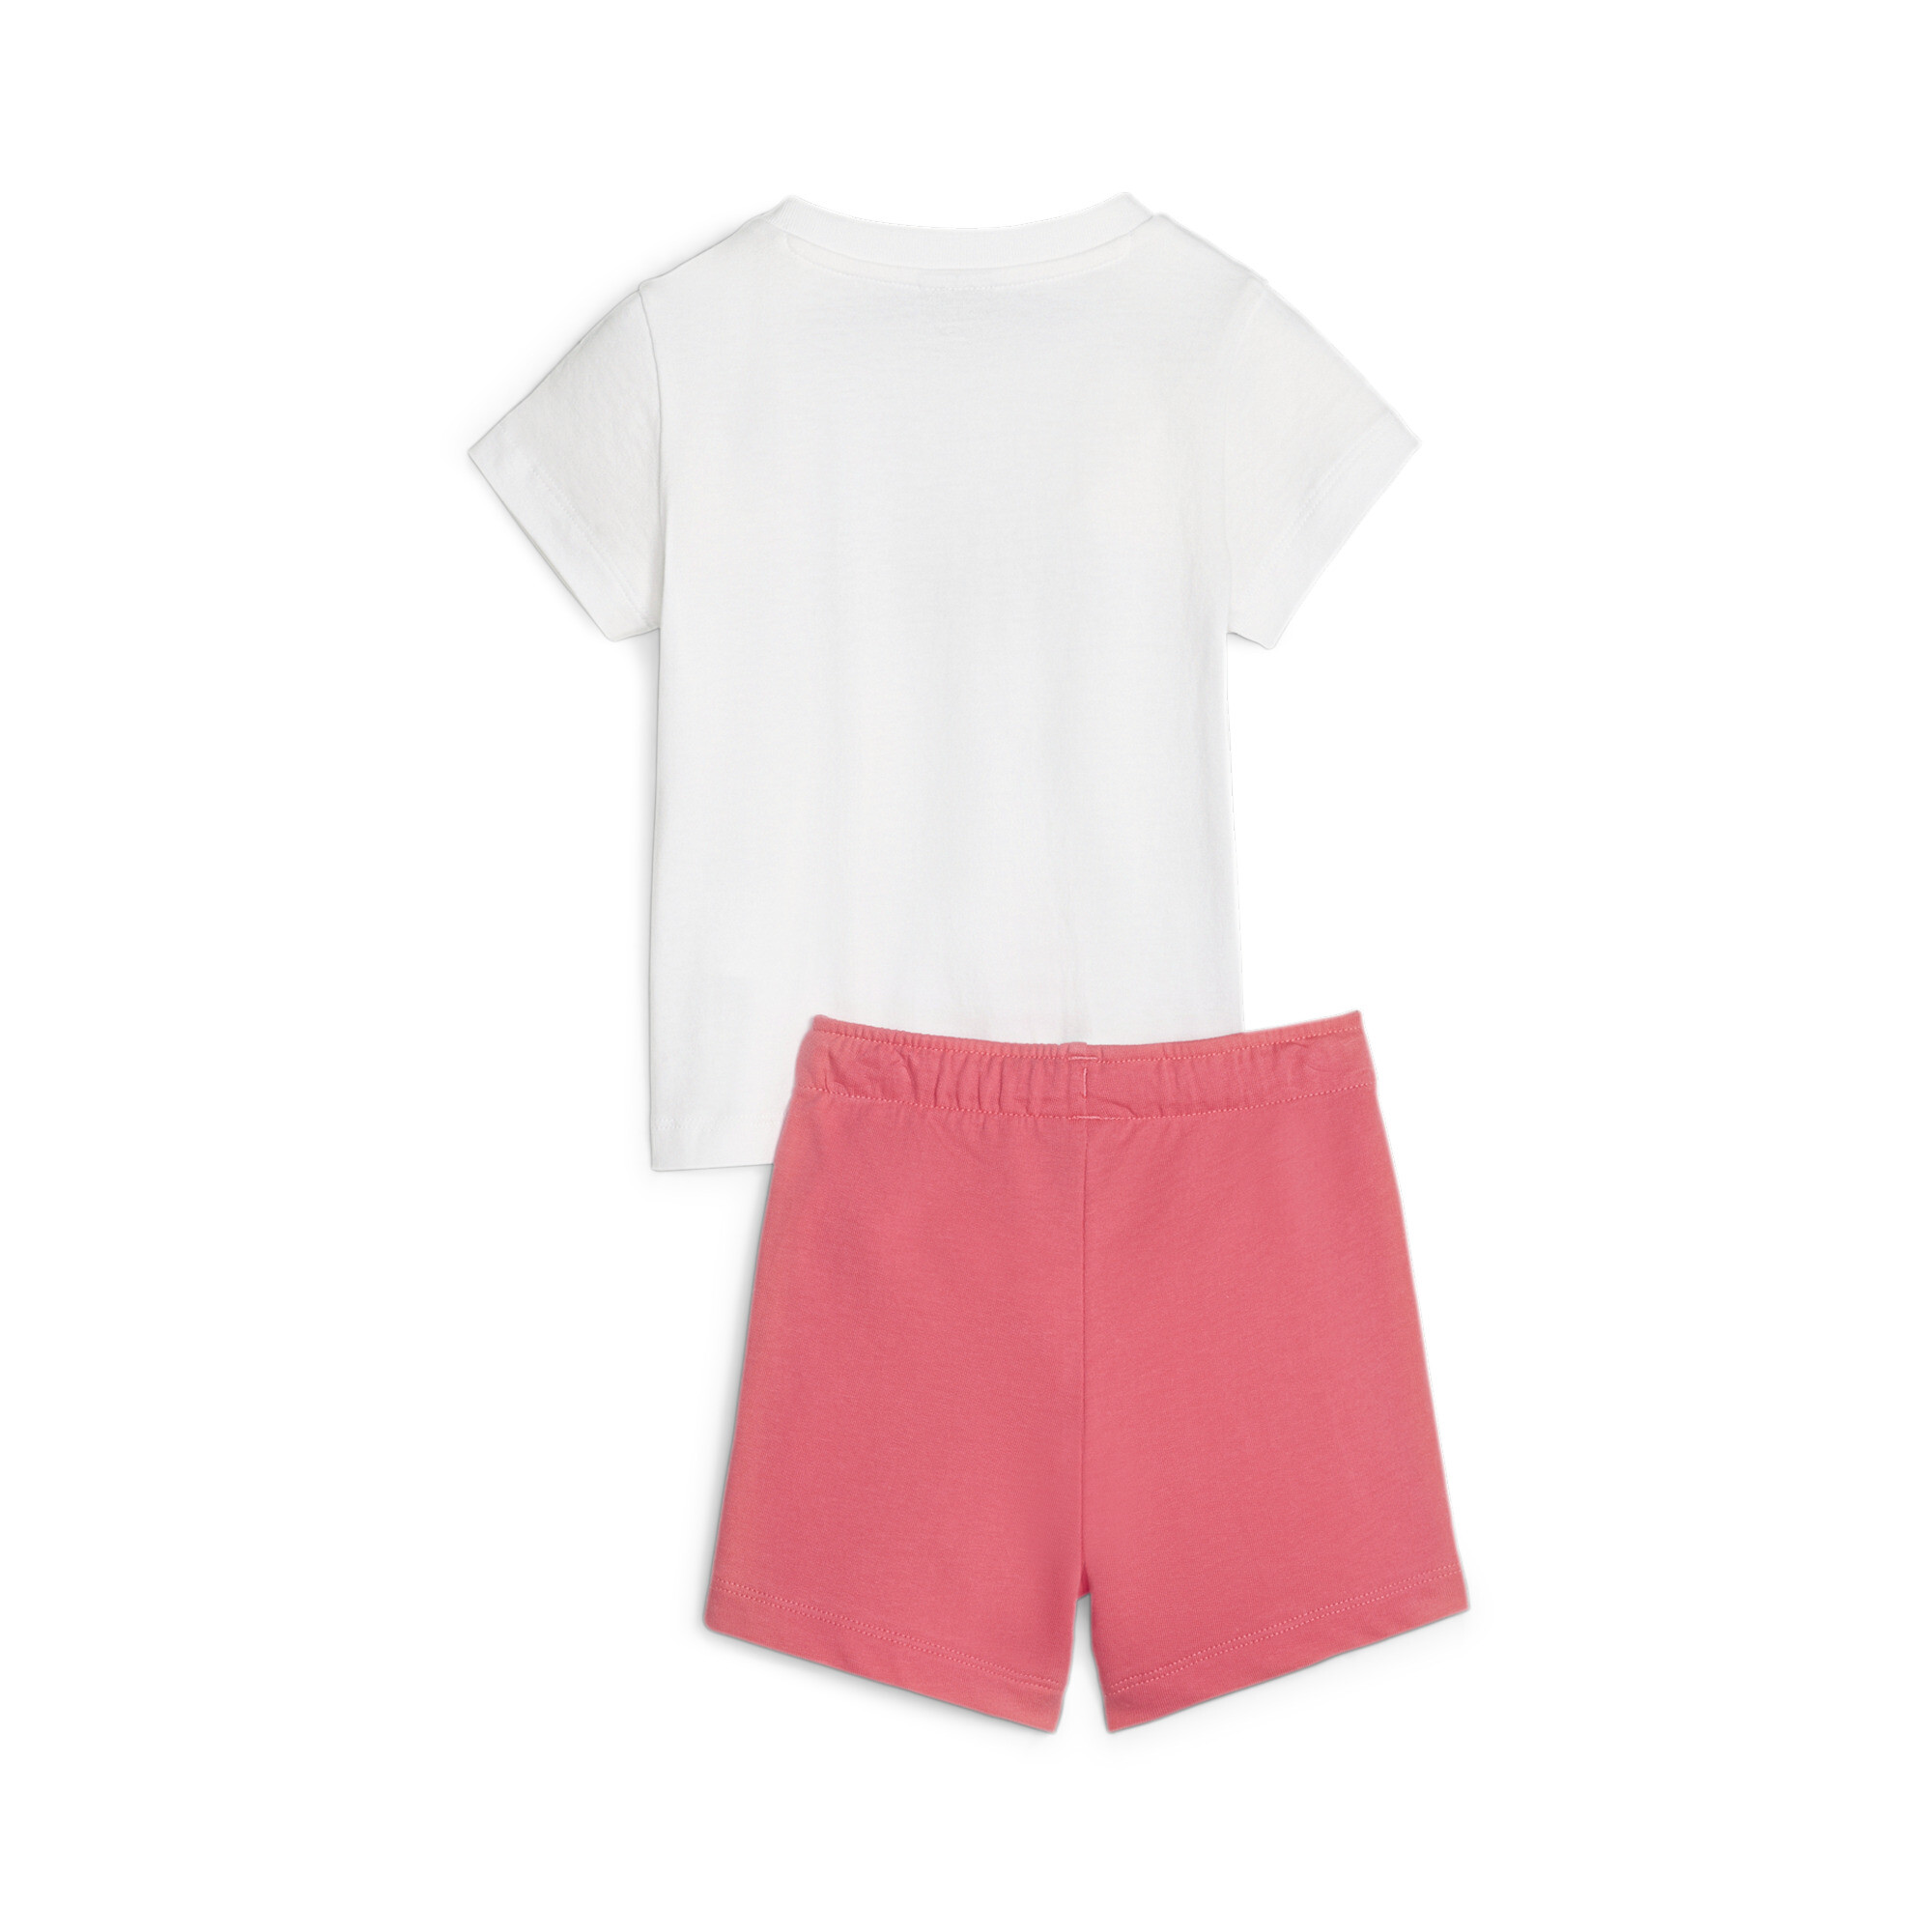 PUMA Minicats T-Shirt And Shorts Babies' Set In Pink, Size 6-9 Months